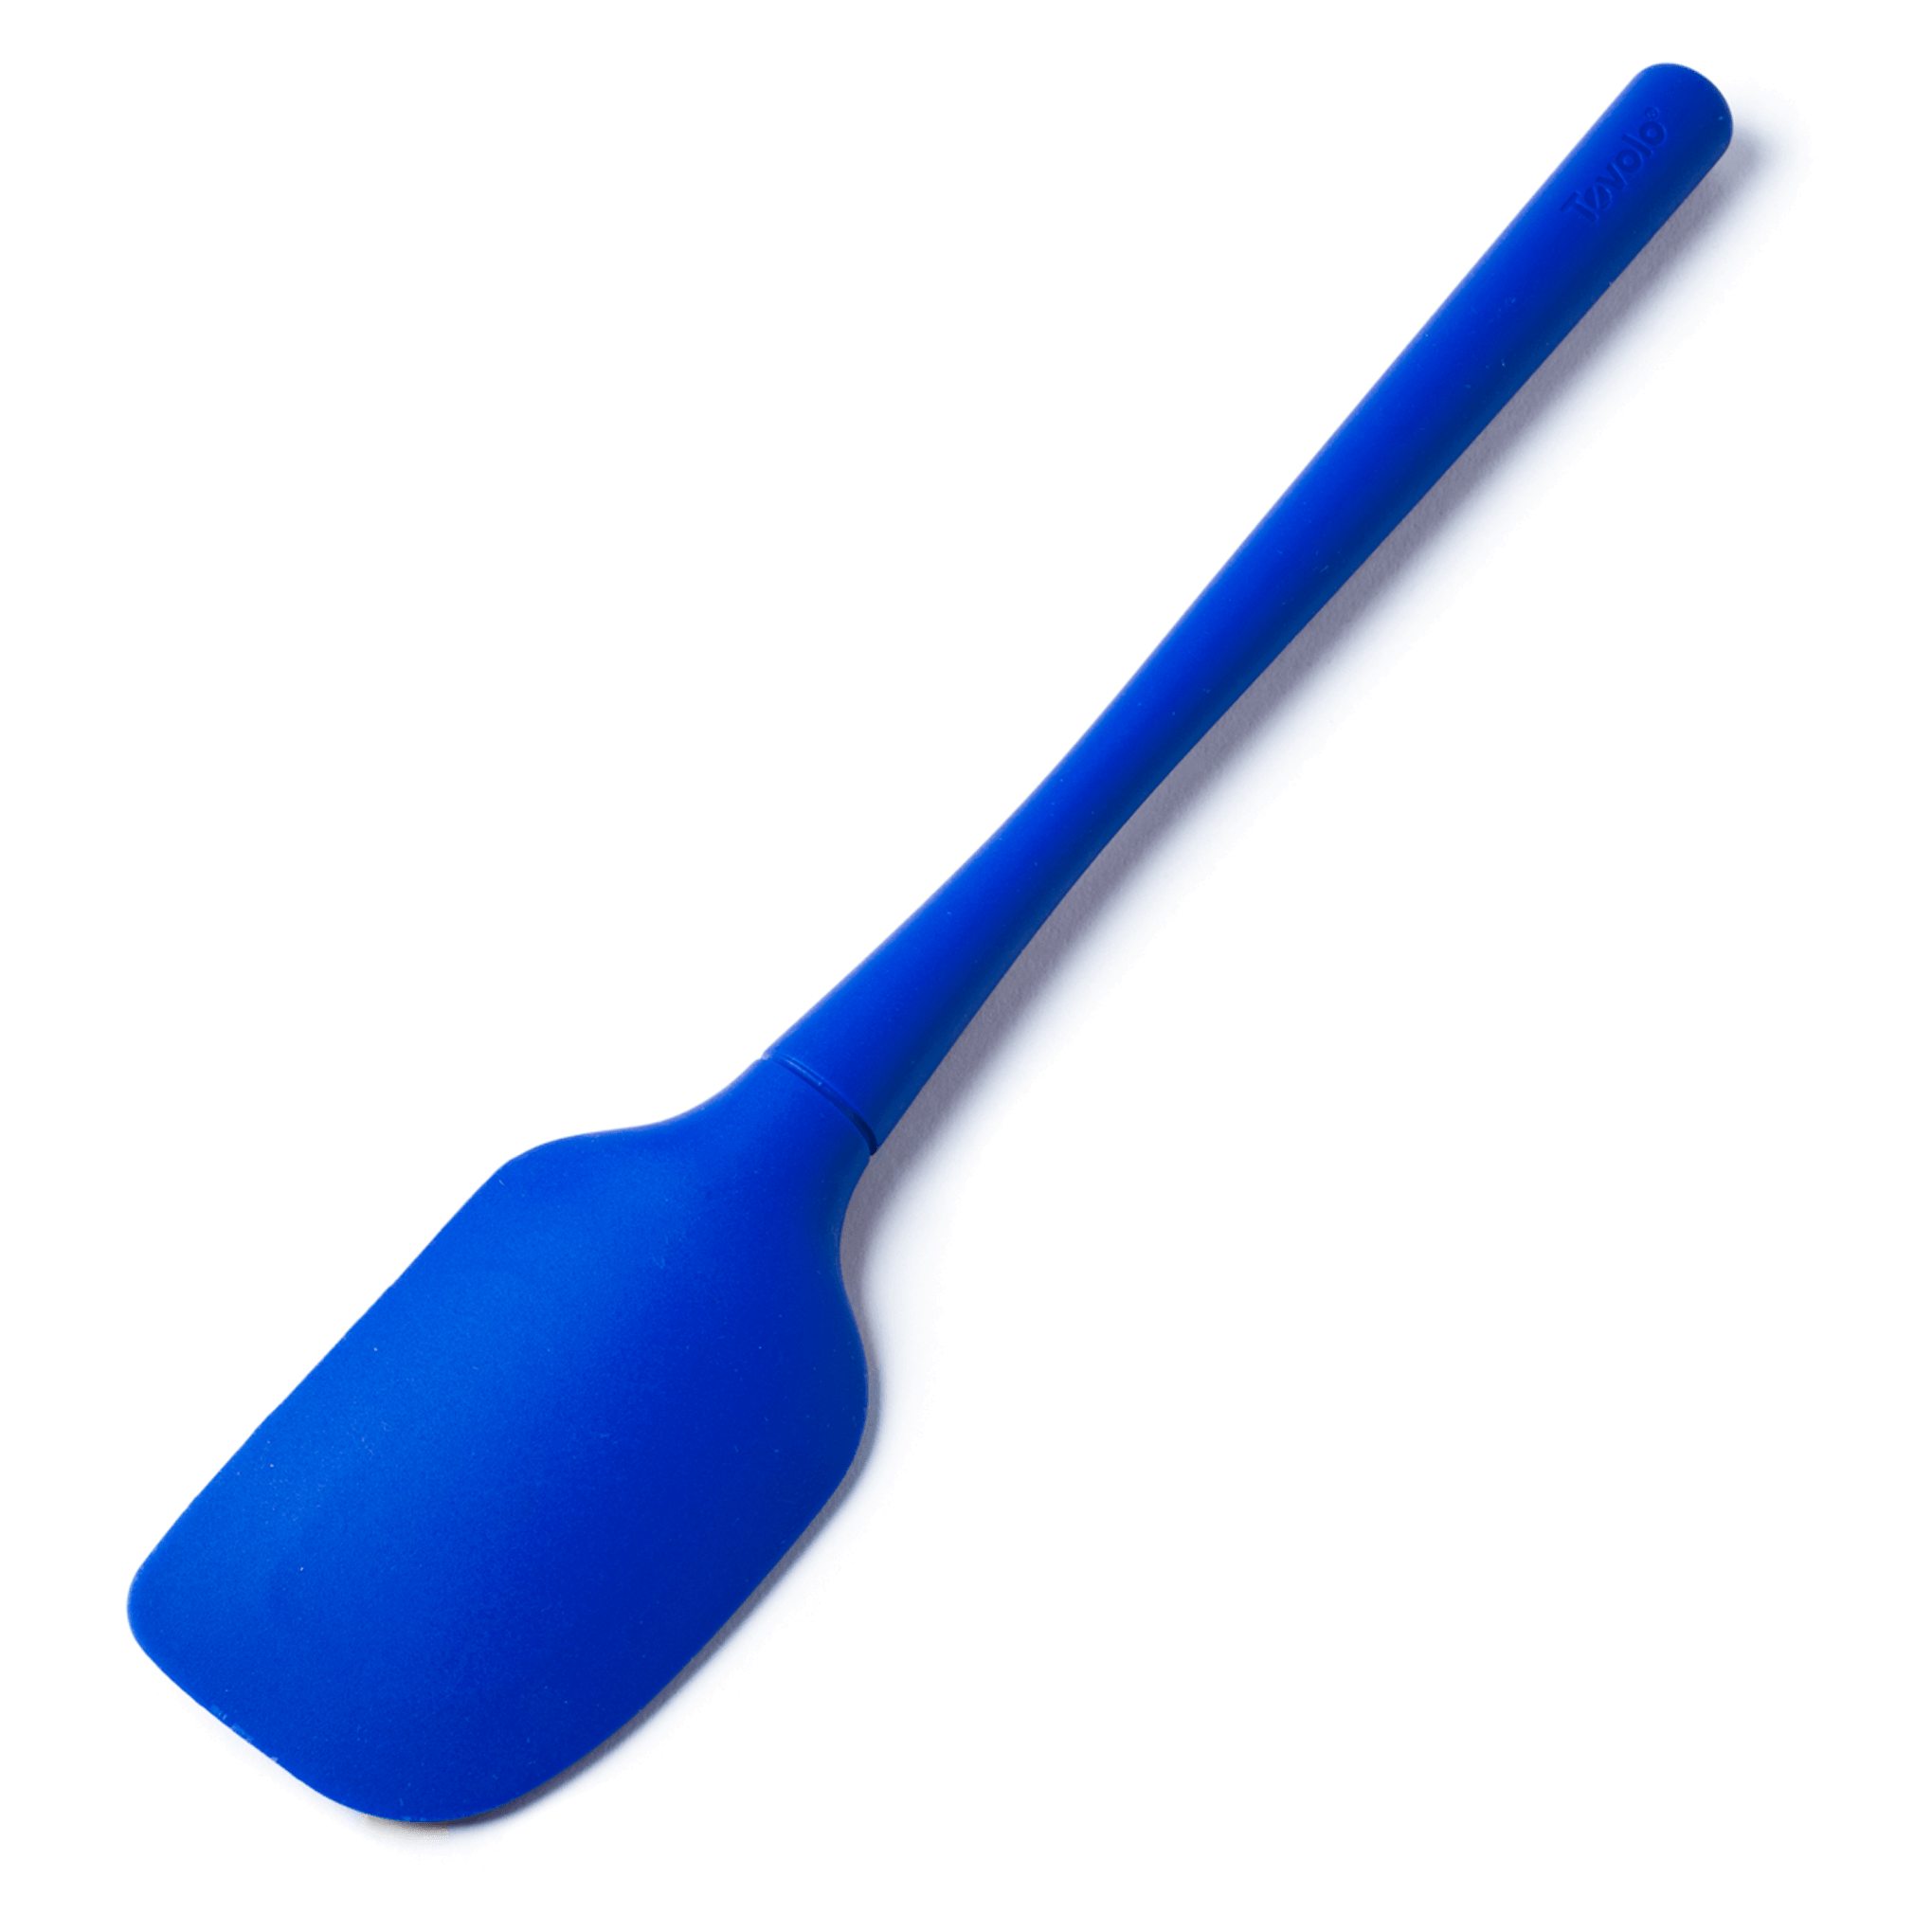 The 9 Best Mixing Spatulas, Tested and Reviewed